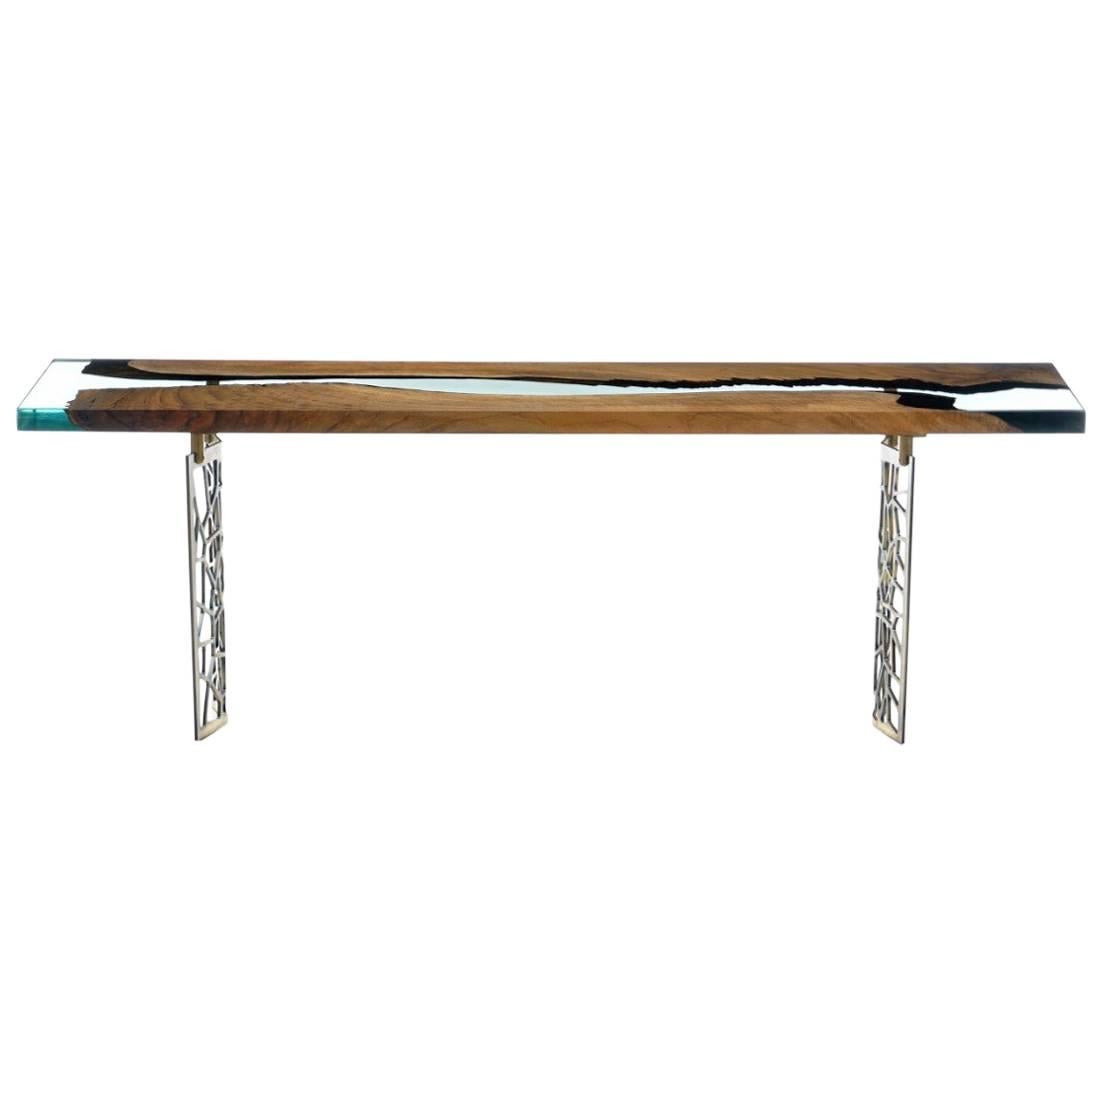 The ‘Primitive 200 Resin Console’ was made in Ankara, Turkey with walnut wood cut into straight edges. It is kilned and dried prior to being filled with high quality resin and placed on steel base. This particular piece is ideal for entryways!